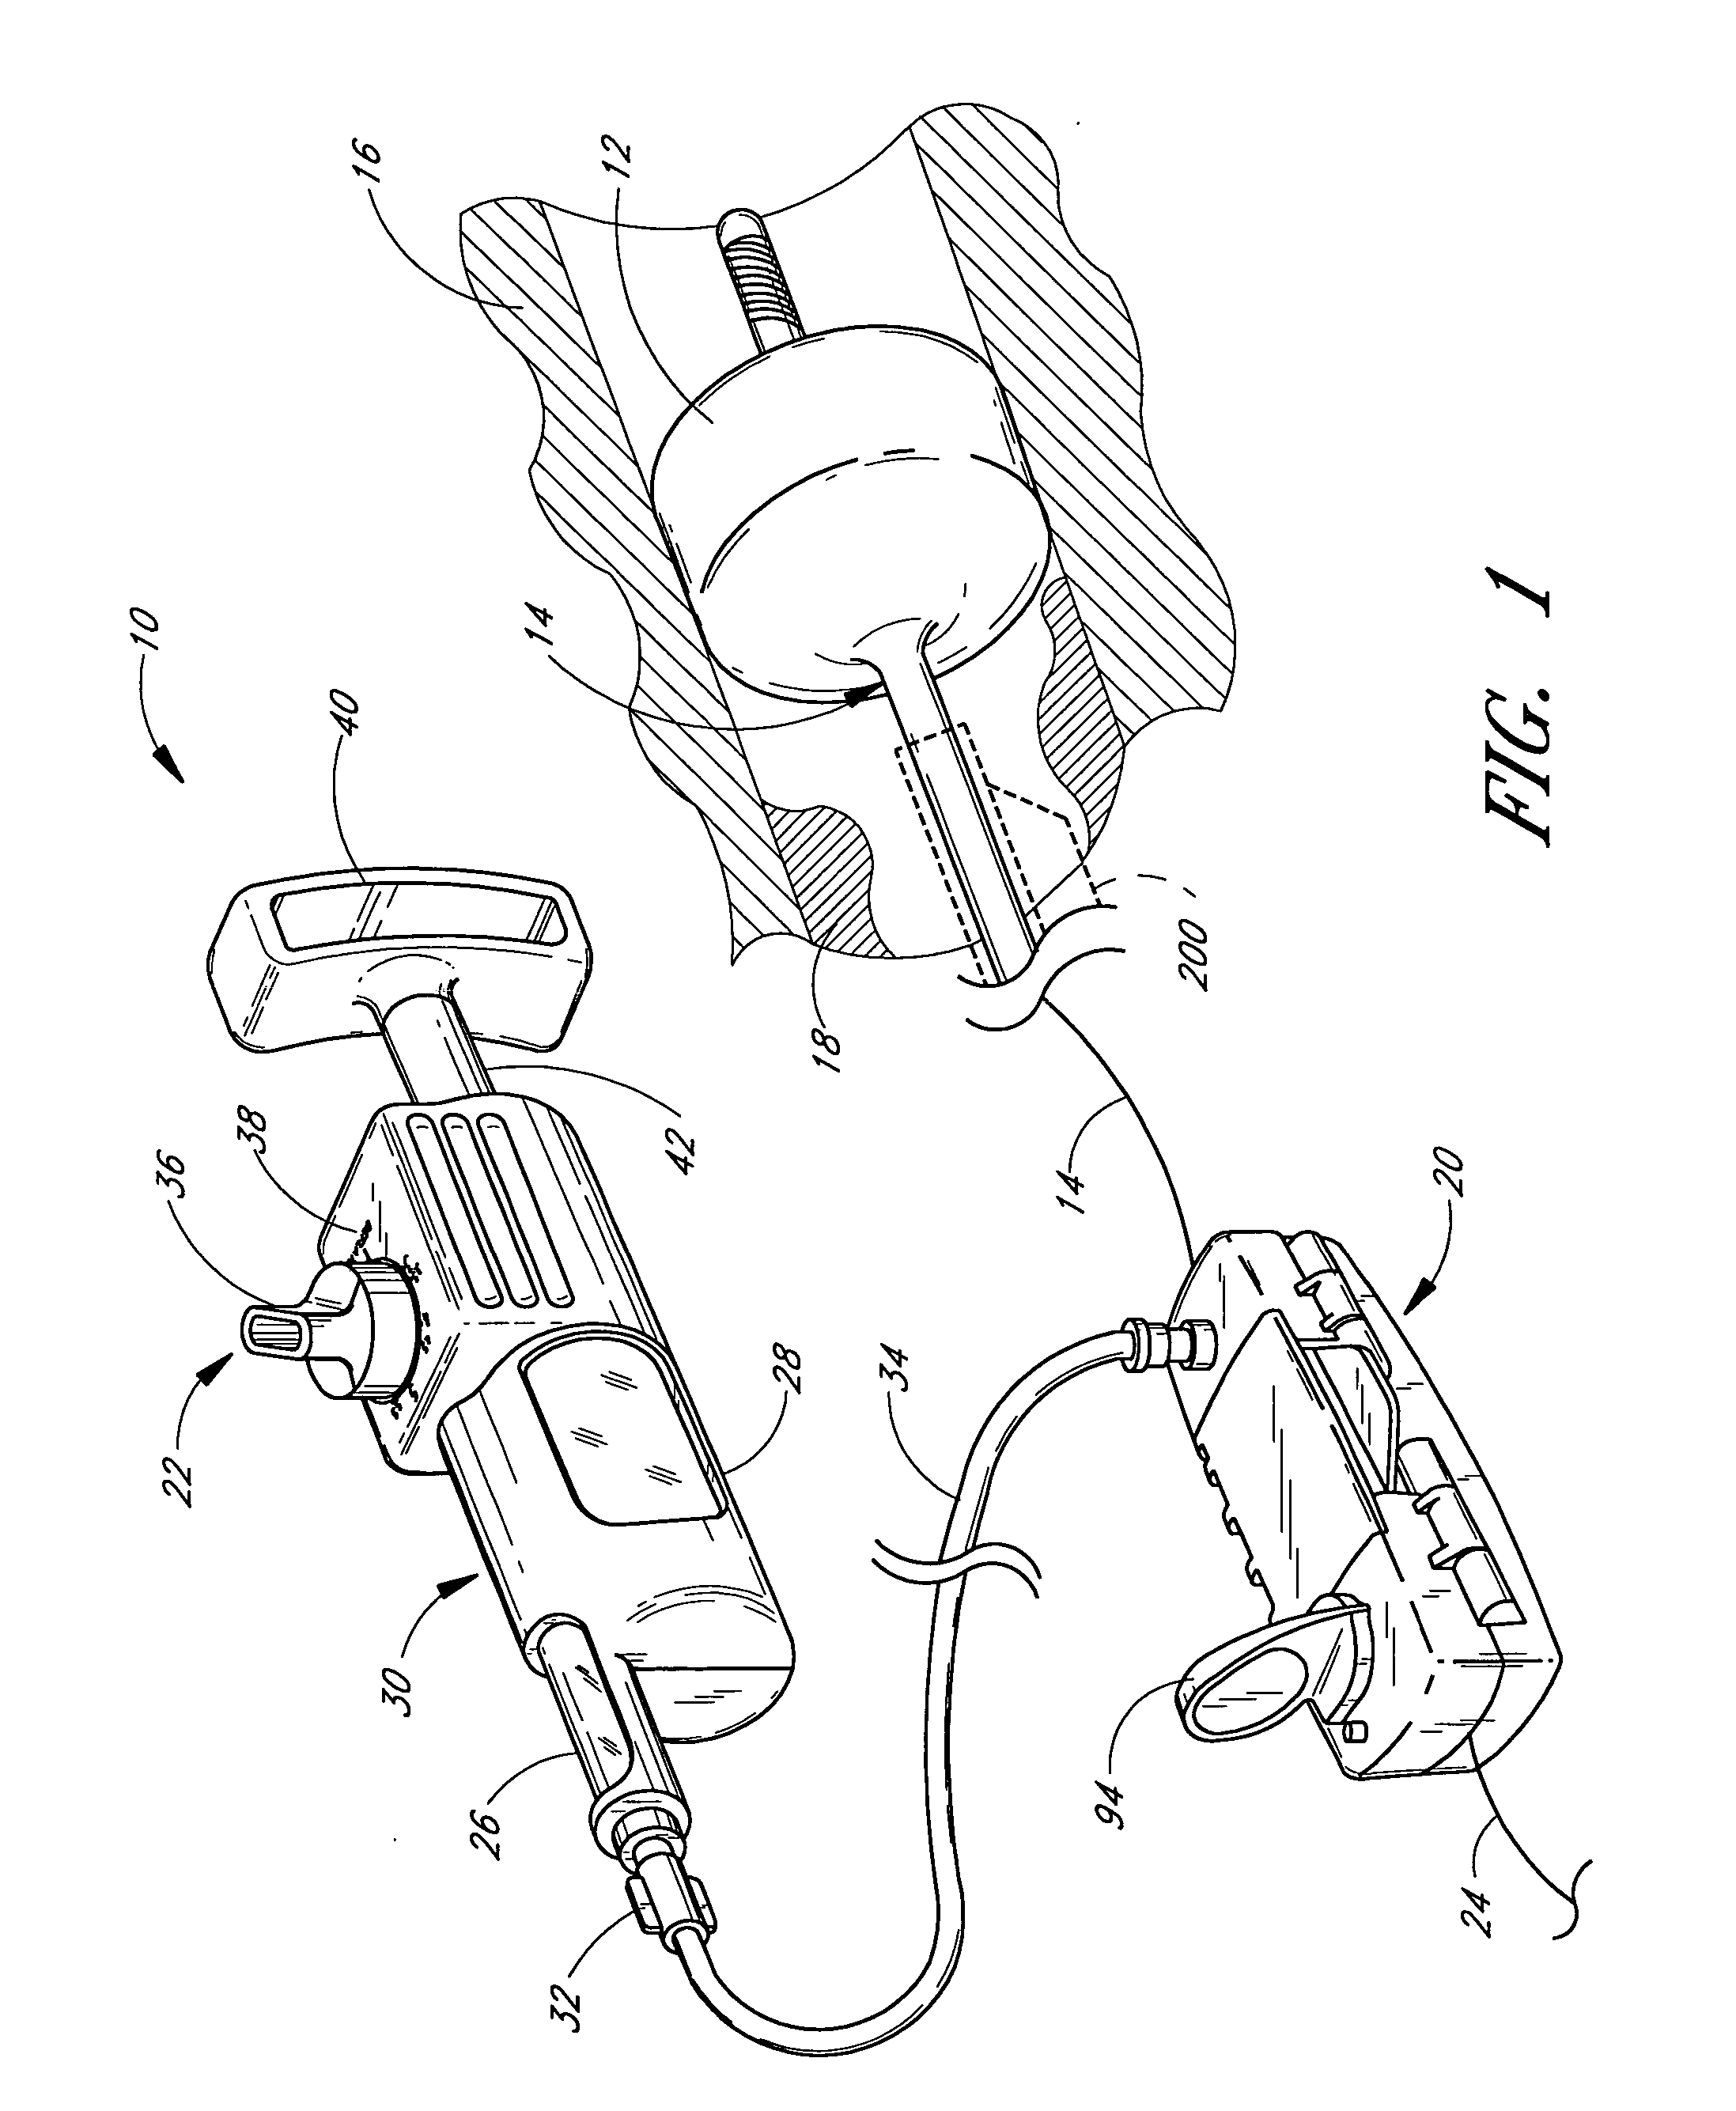 Method and apparatuses for treating an intravascular occlusion